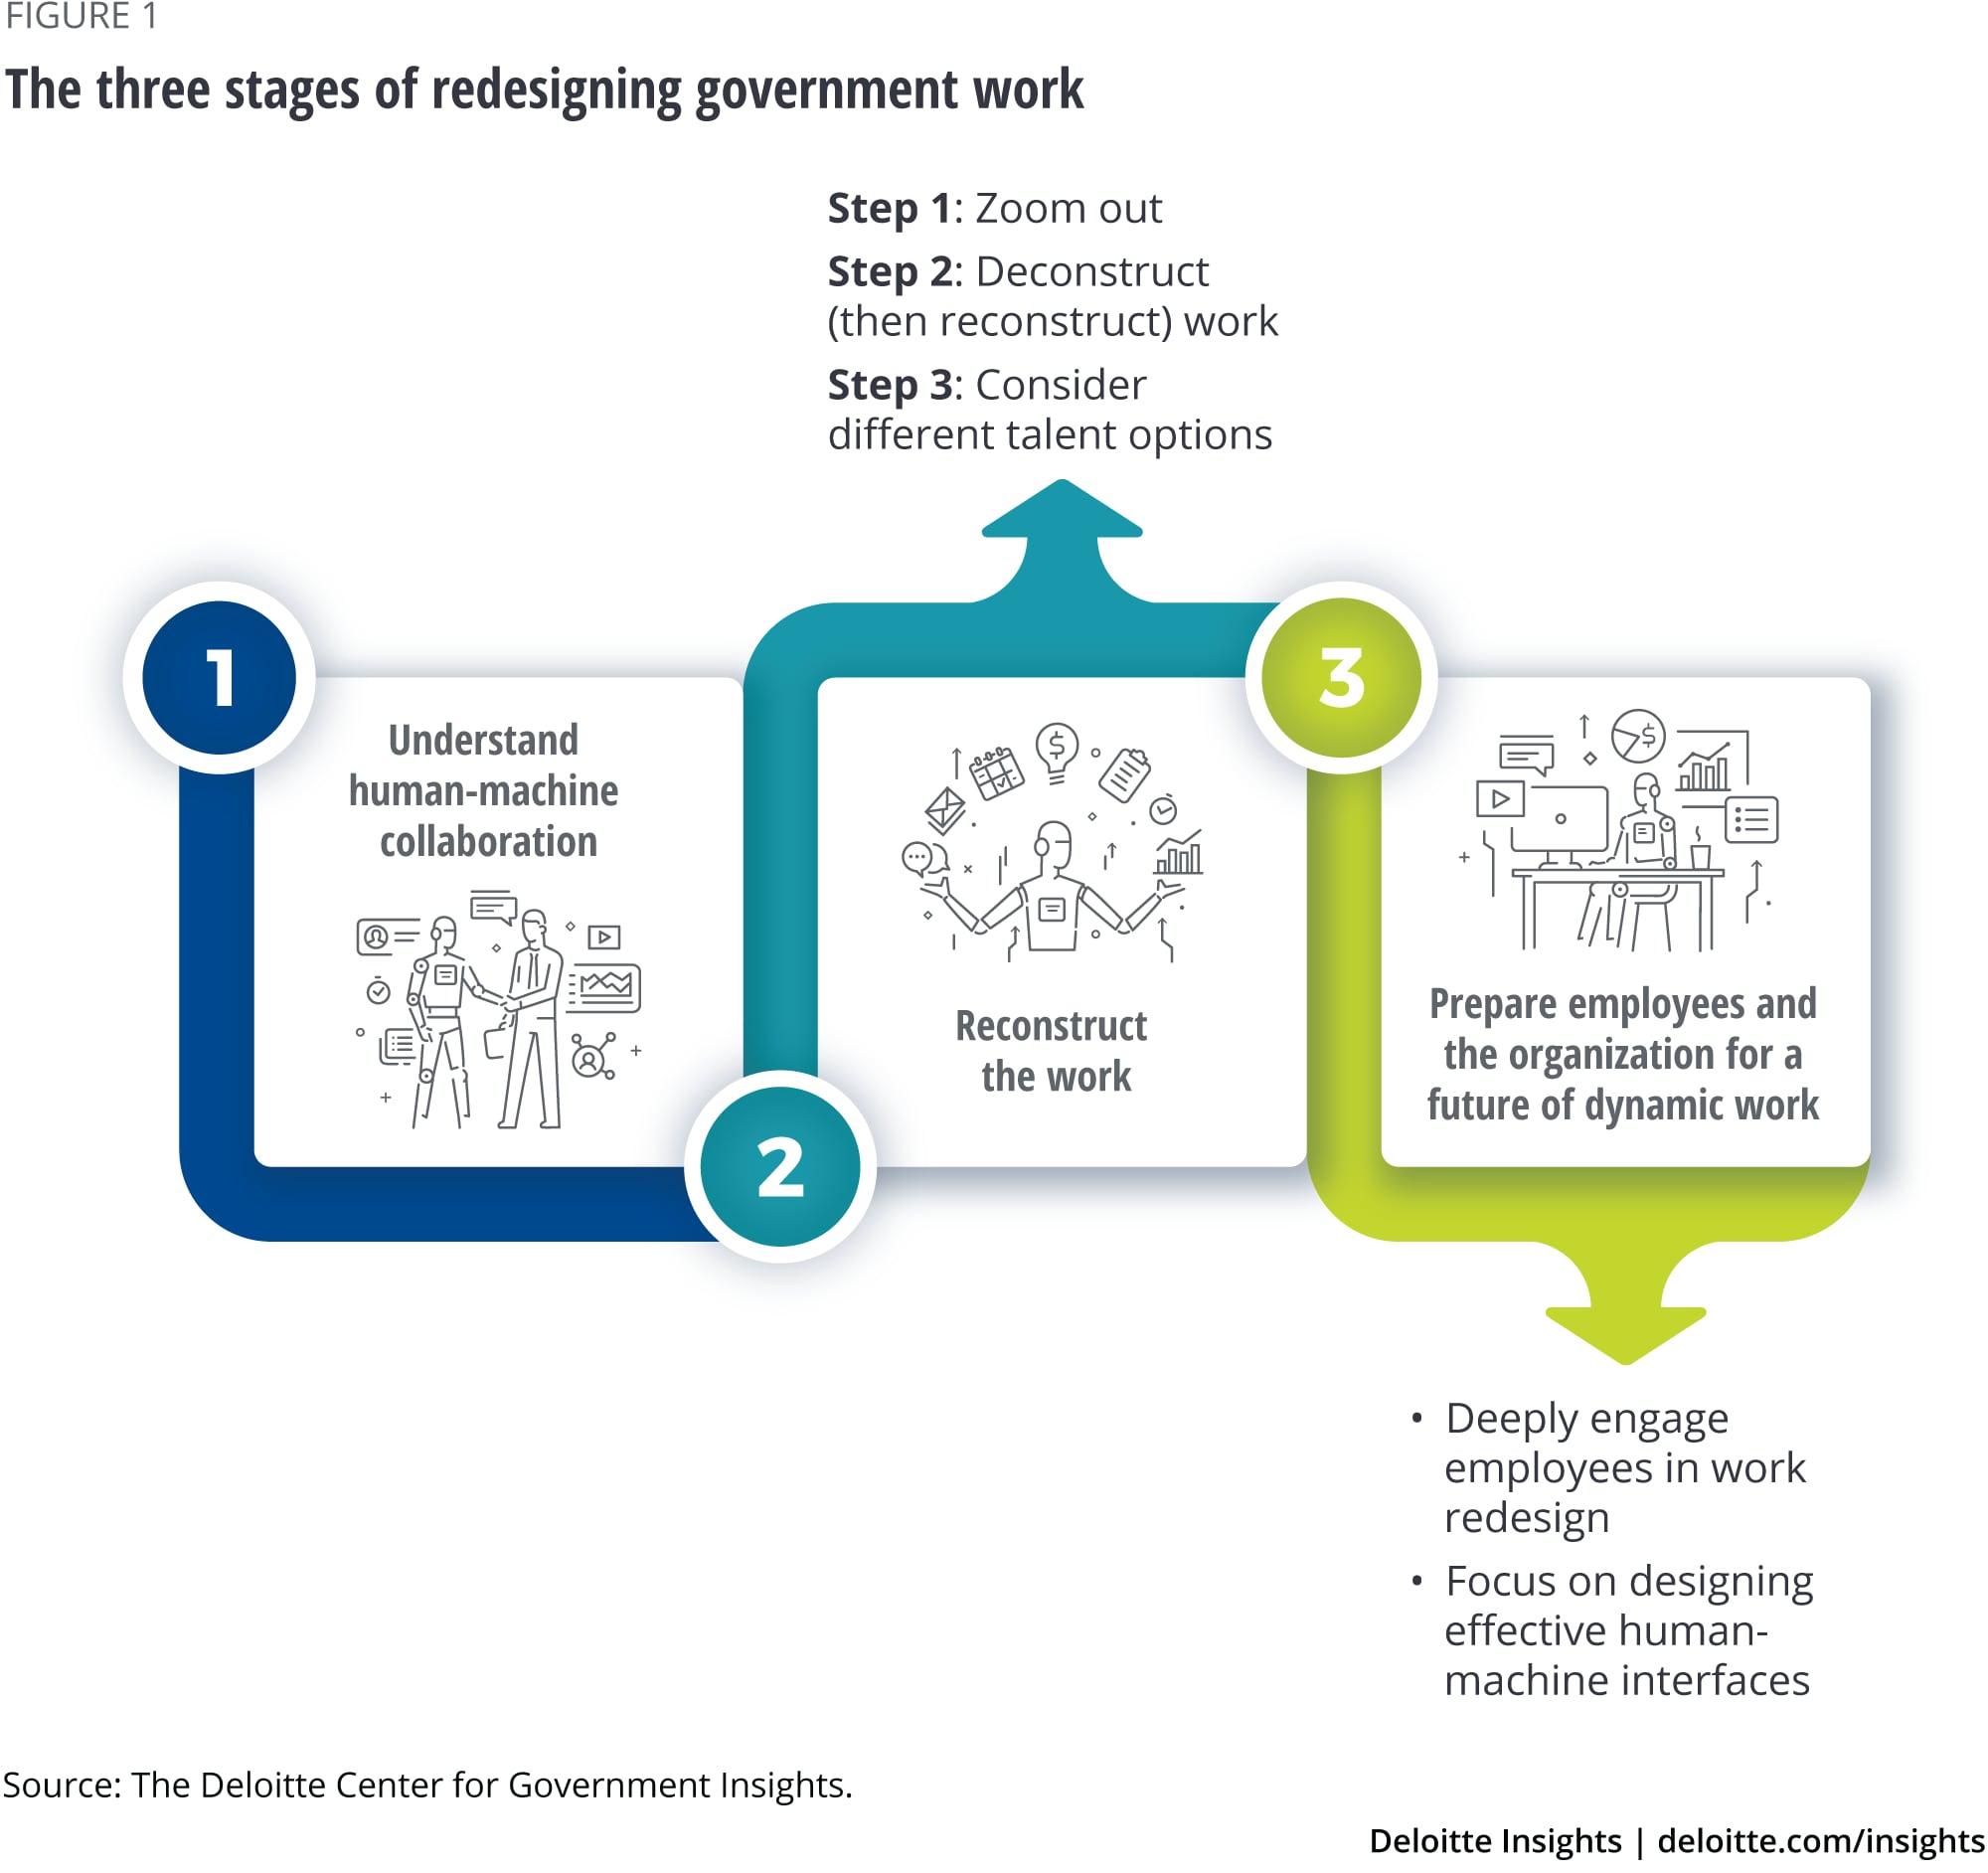 The three stages of redesigning government work